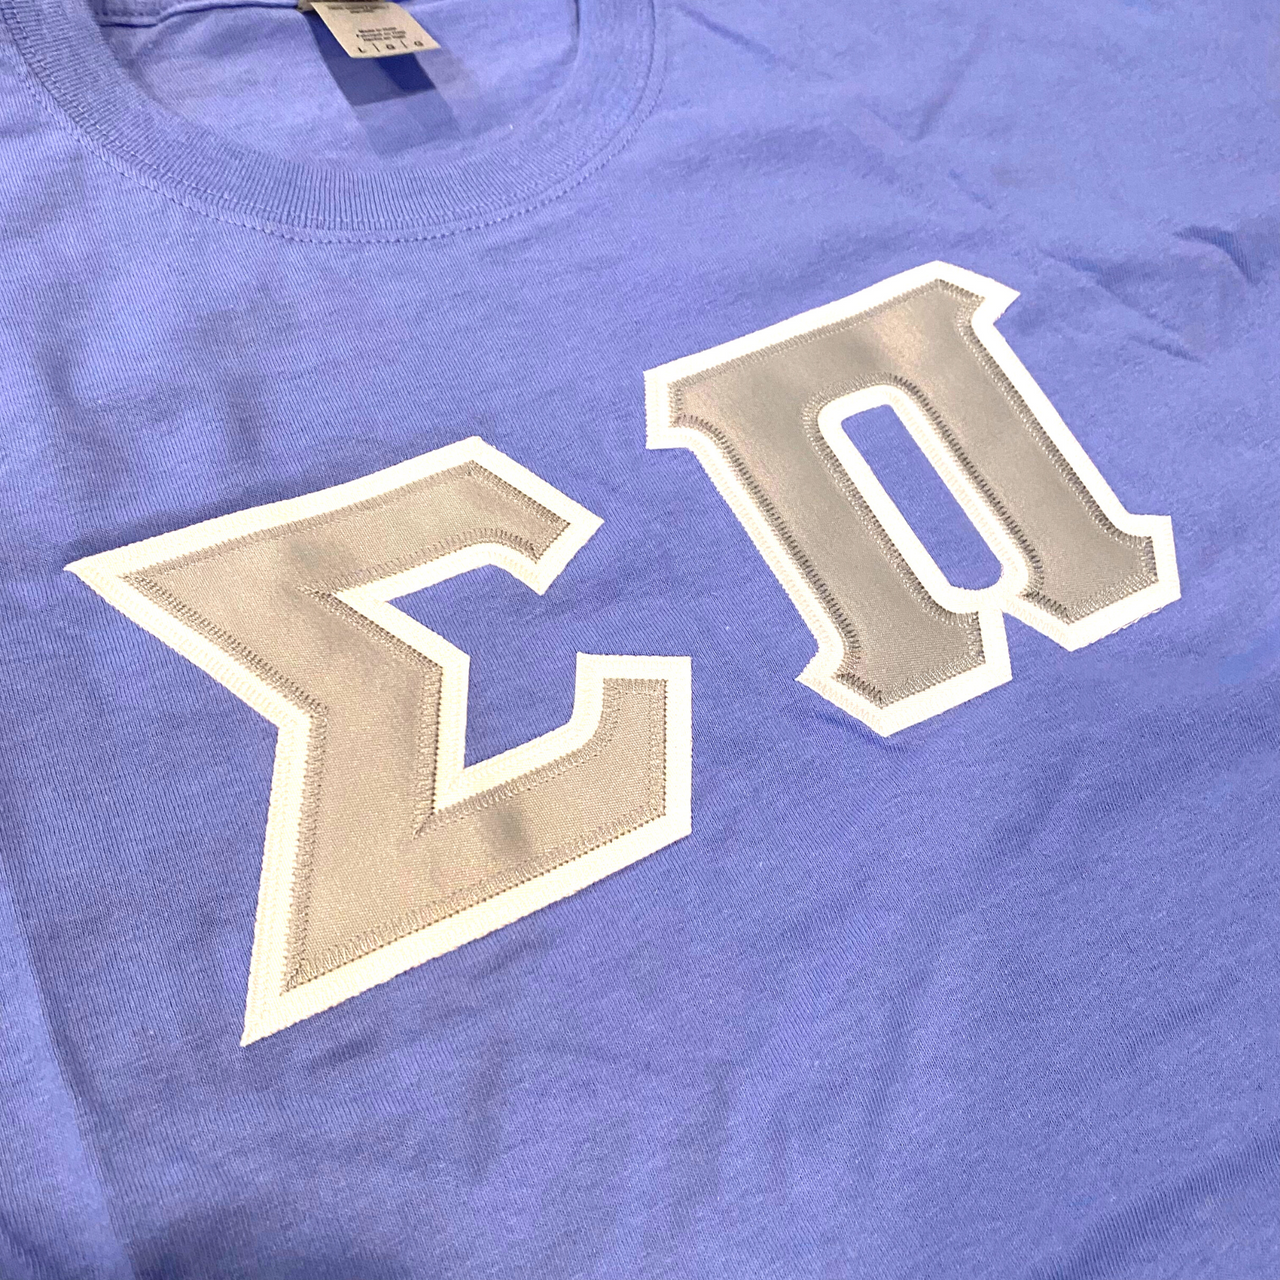 Sigma Pi Stitched Letter T-Shirt | Flo Blue | Gray Letters with White Border